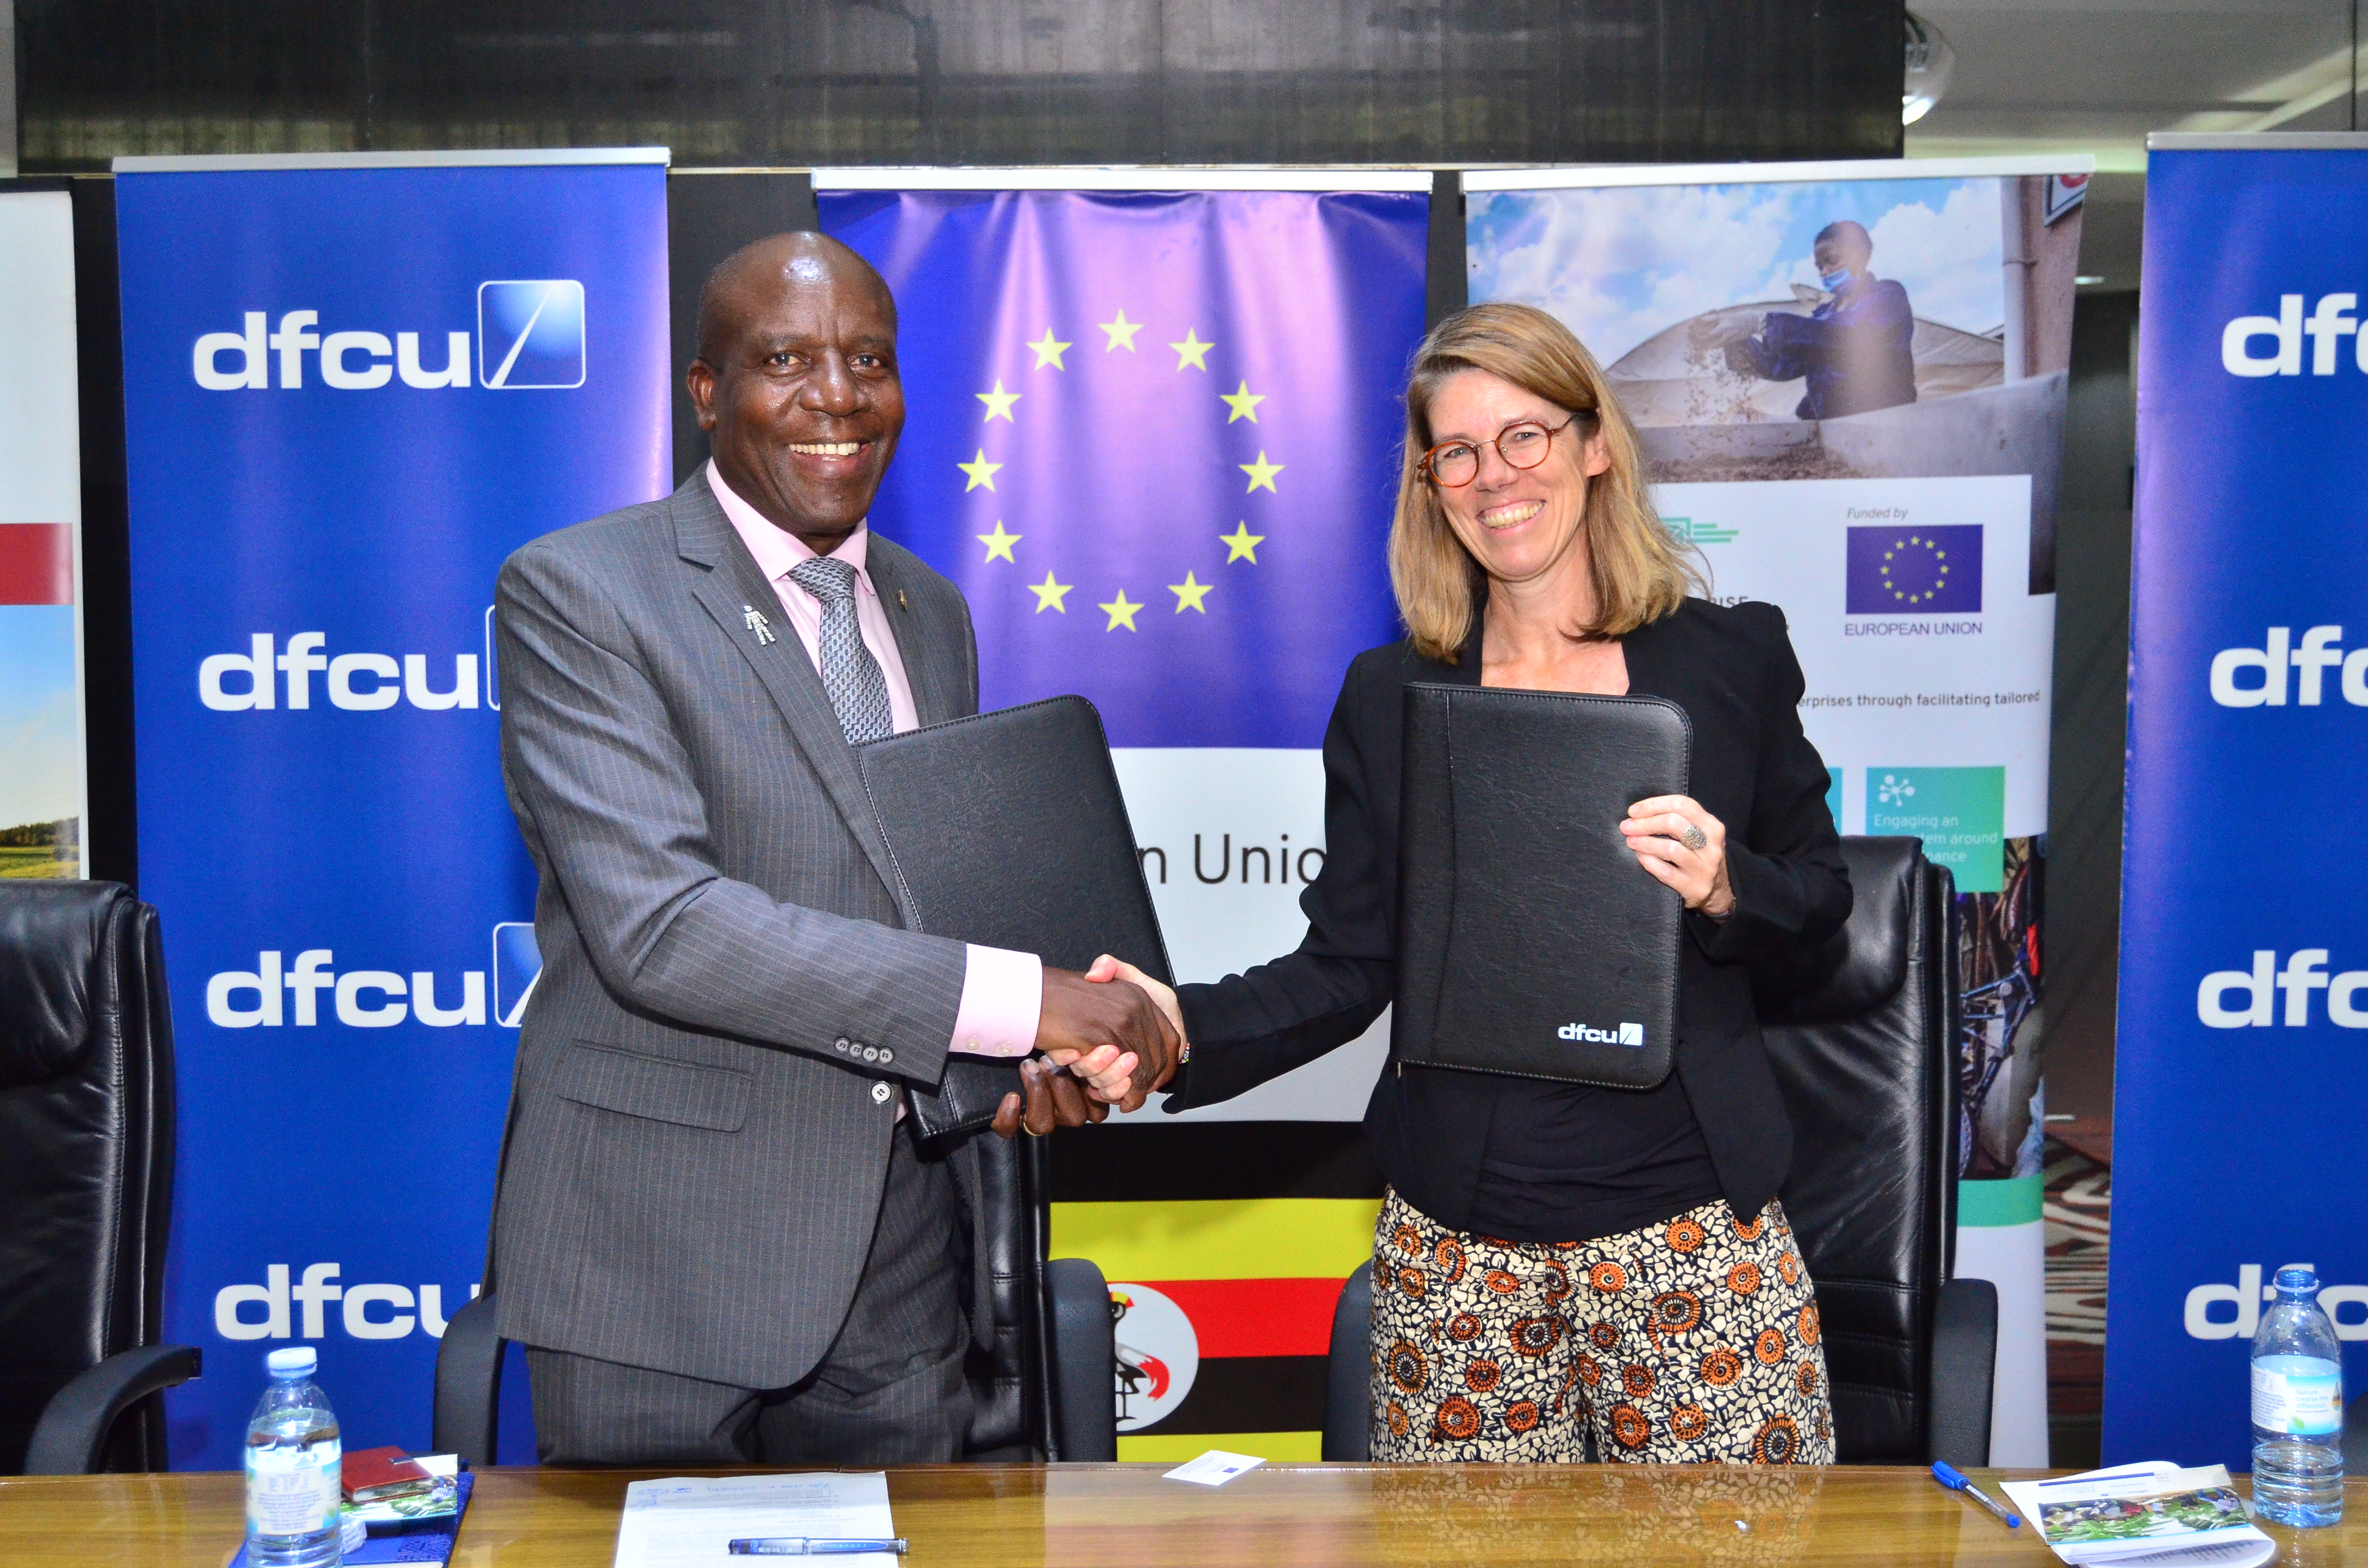 UGEFA Announces Collaboration with dfcu Bank for Sustainable Future in Uganda